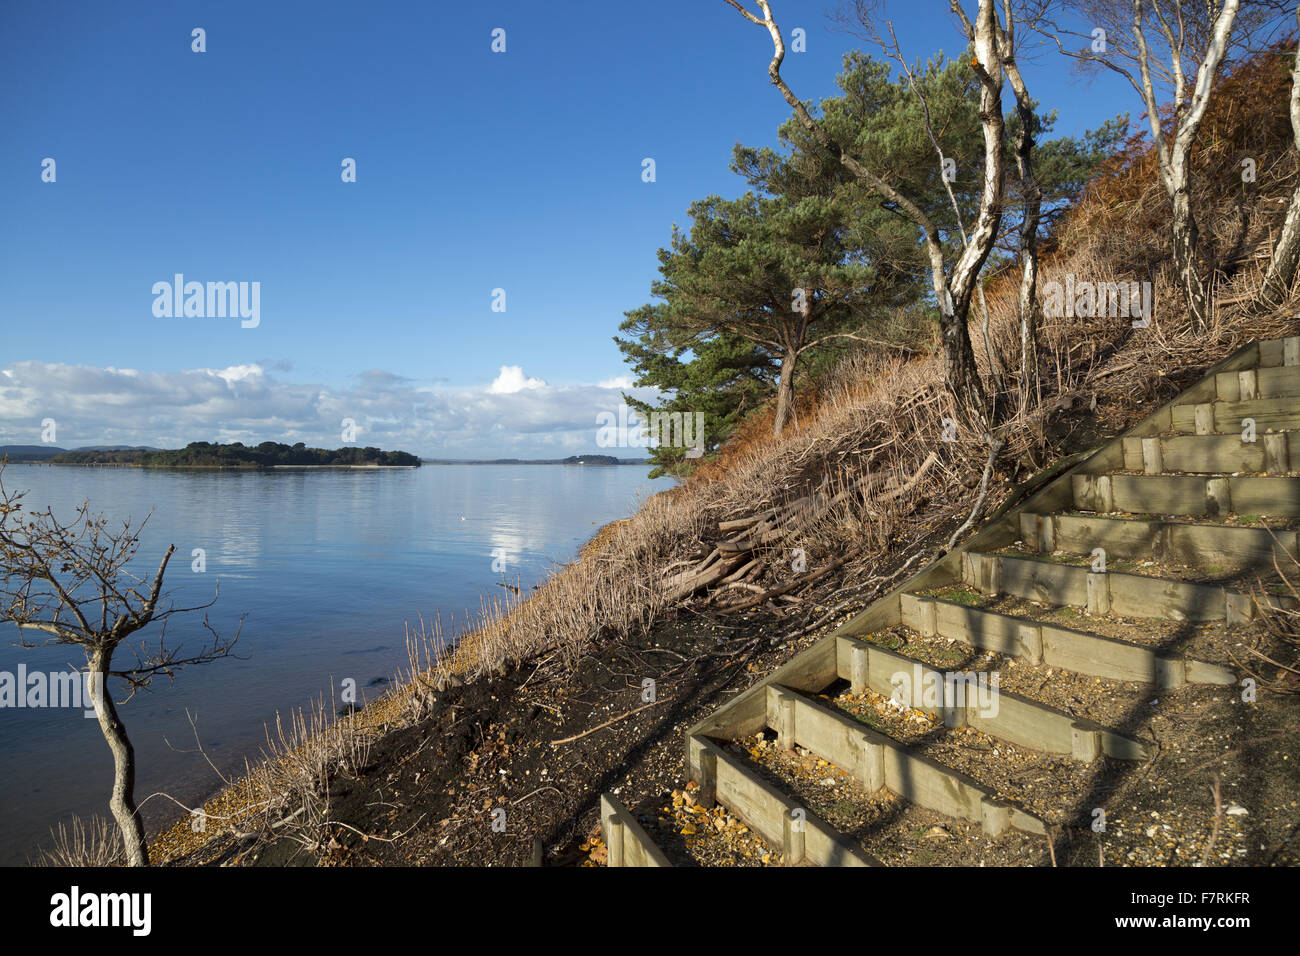 The south shore of Brownsea Island, Dorset. This island wildlife sanctuary is a haven for wildlife such as red squirrels and a huge variety of birds. Stock Photo